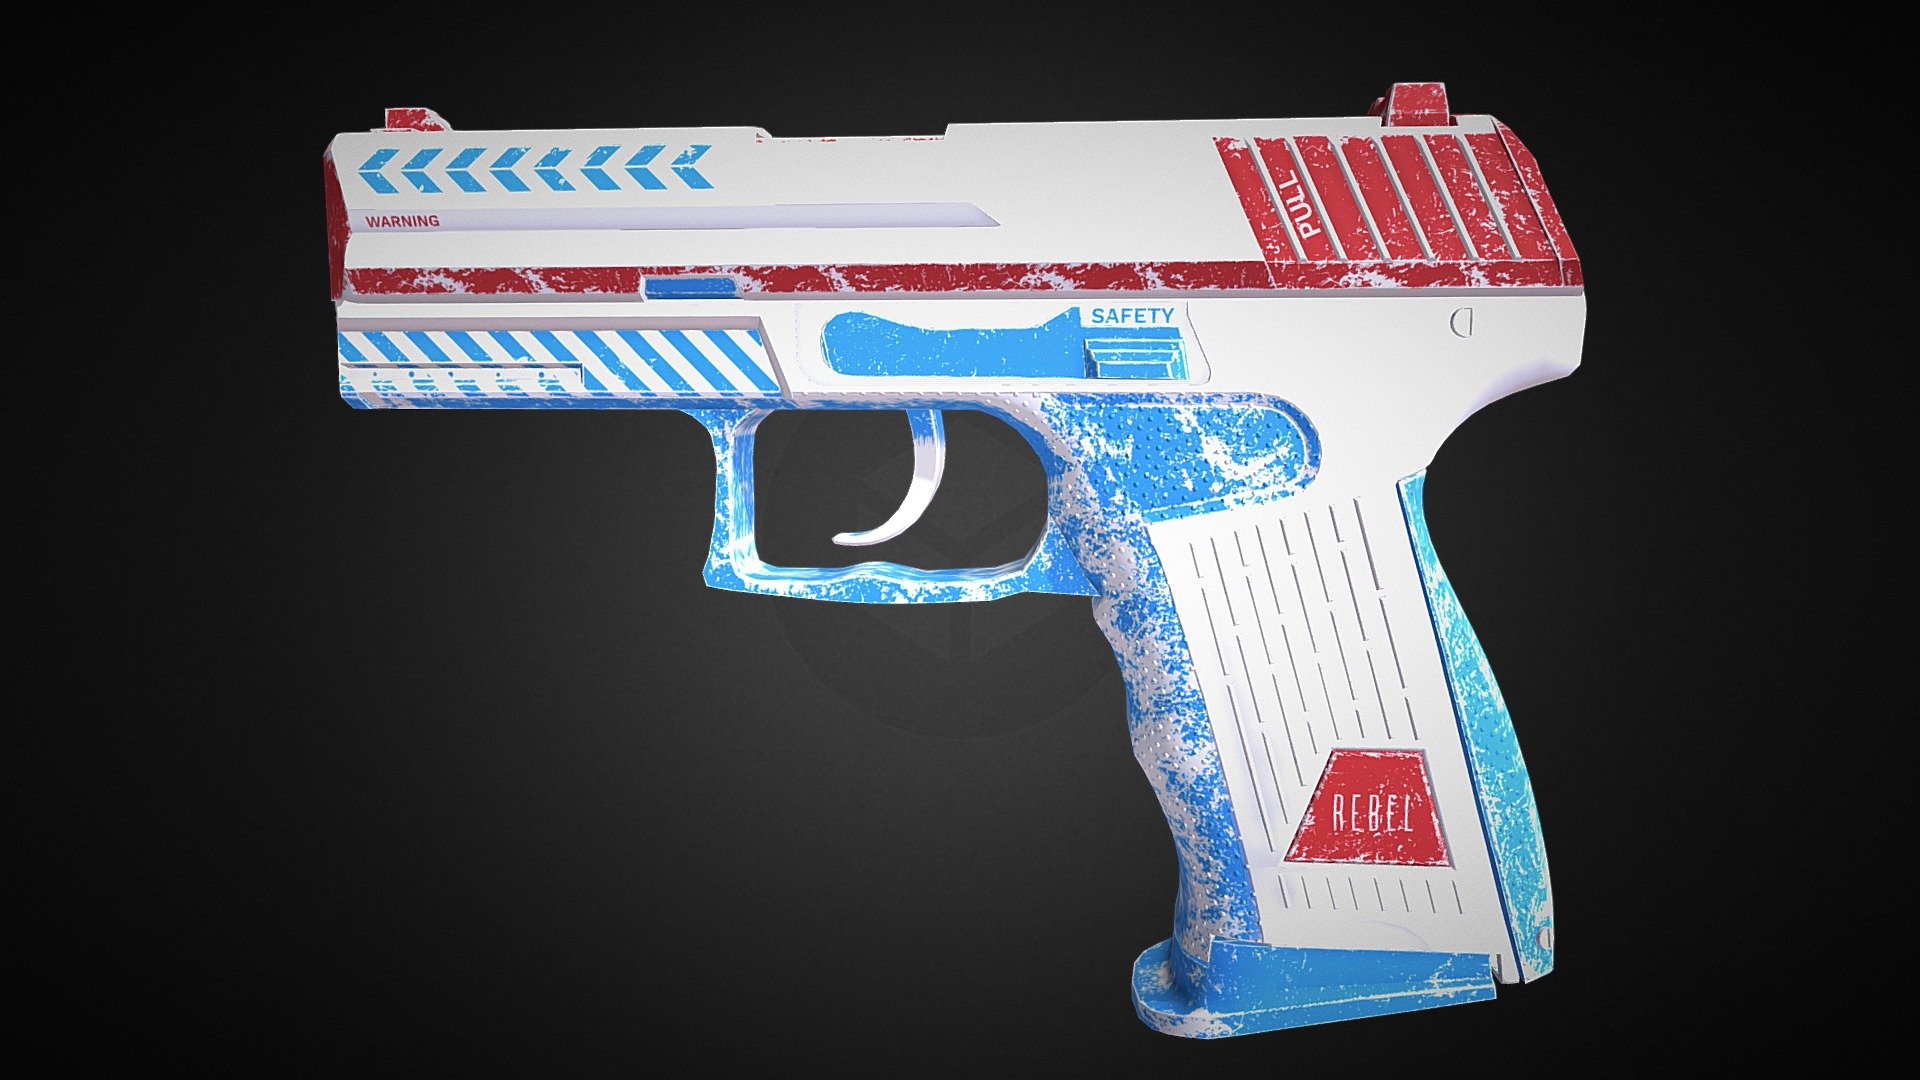 P2000 Ivory cs go skin download the last version for apple